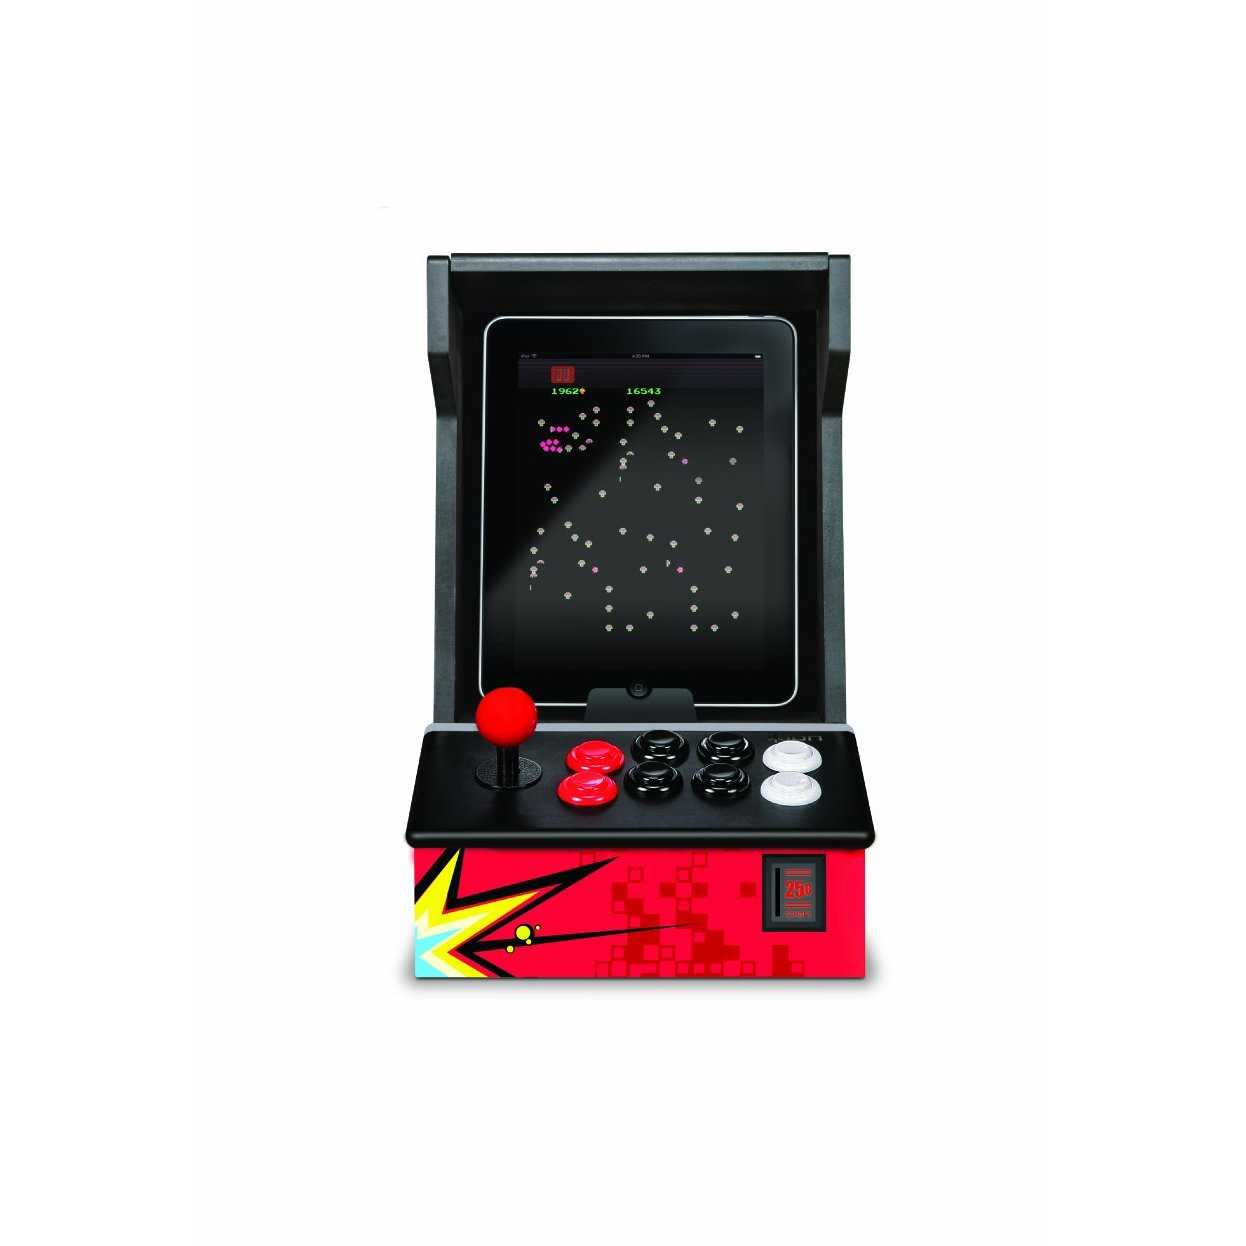 http://thetechjournal.com/wp-content/uploads/images/1201/1326110195-ion-icade-arcade-cabinet-for-ipad-2.jpg